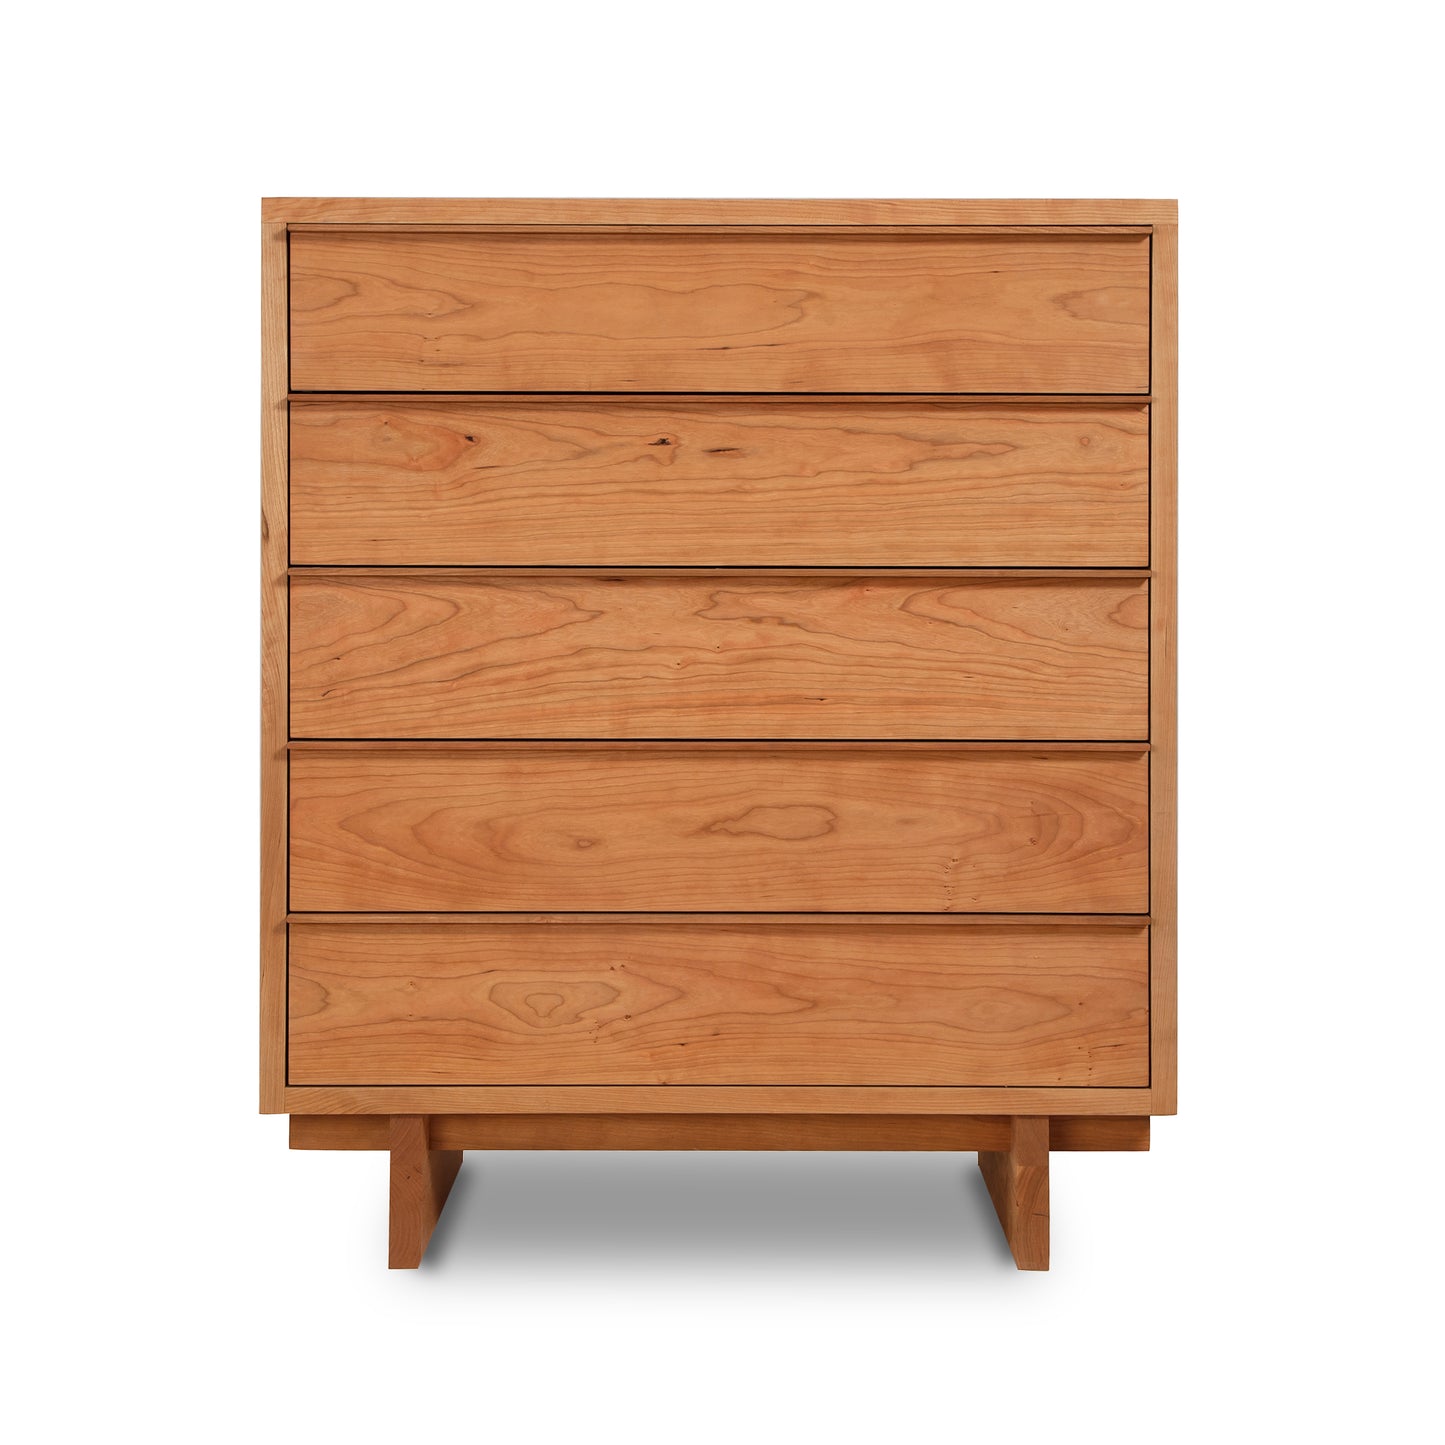 A handcrafted Vermont Furniture Designs Kipling 5-Drawer Wide Chest stands against a white background.